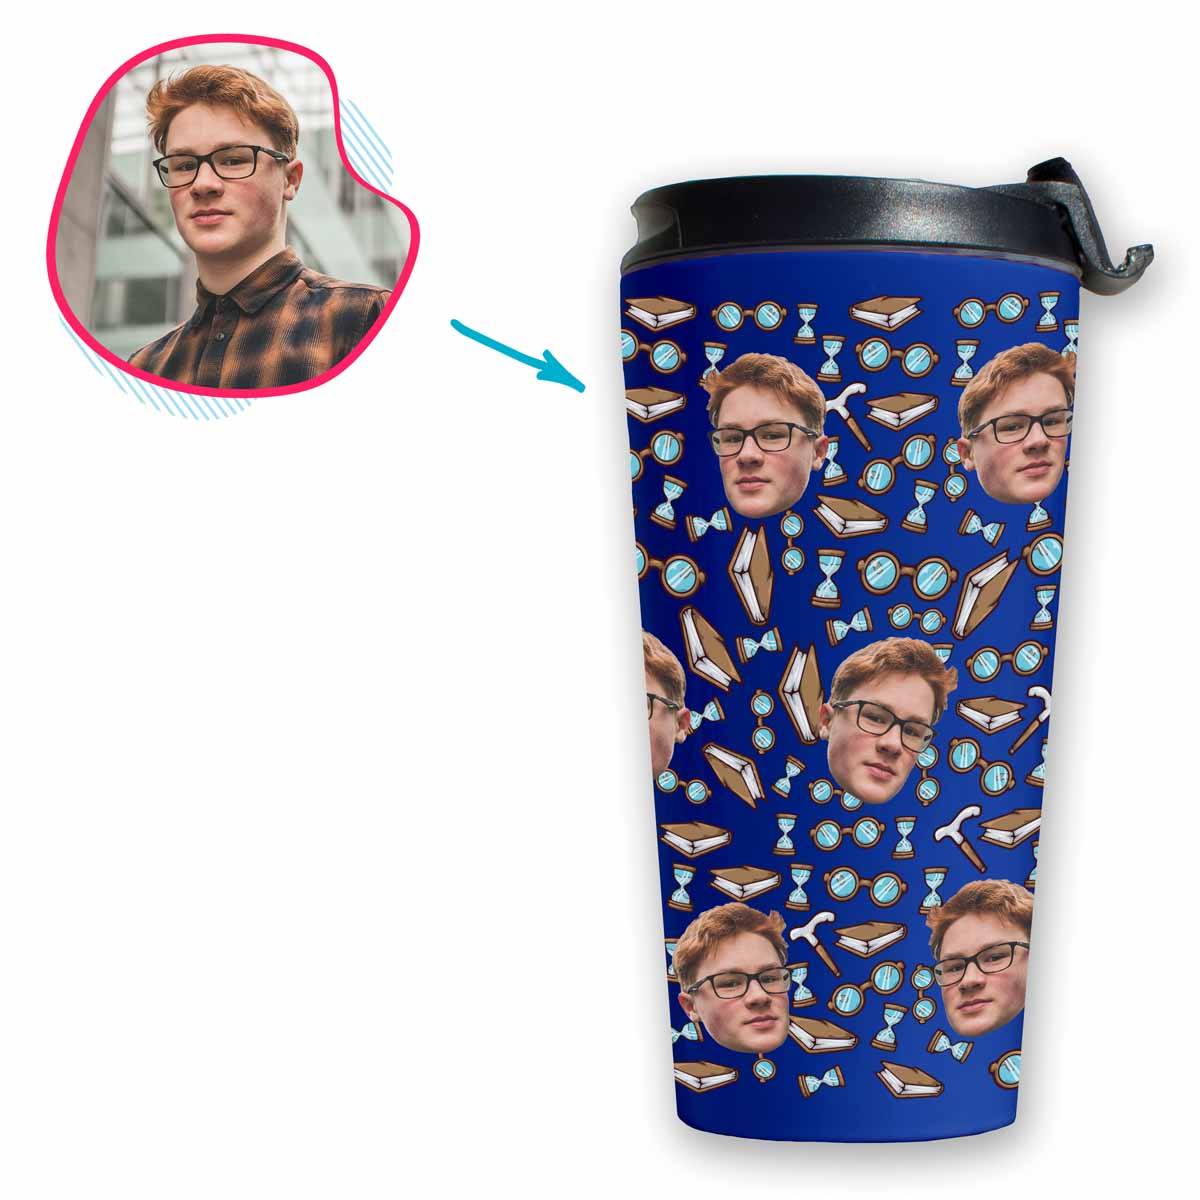 Darkblue Retirement personalized travel mug with photo of face printed on it